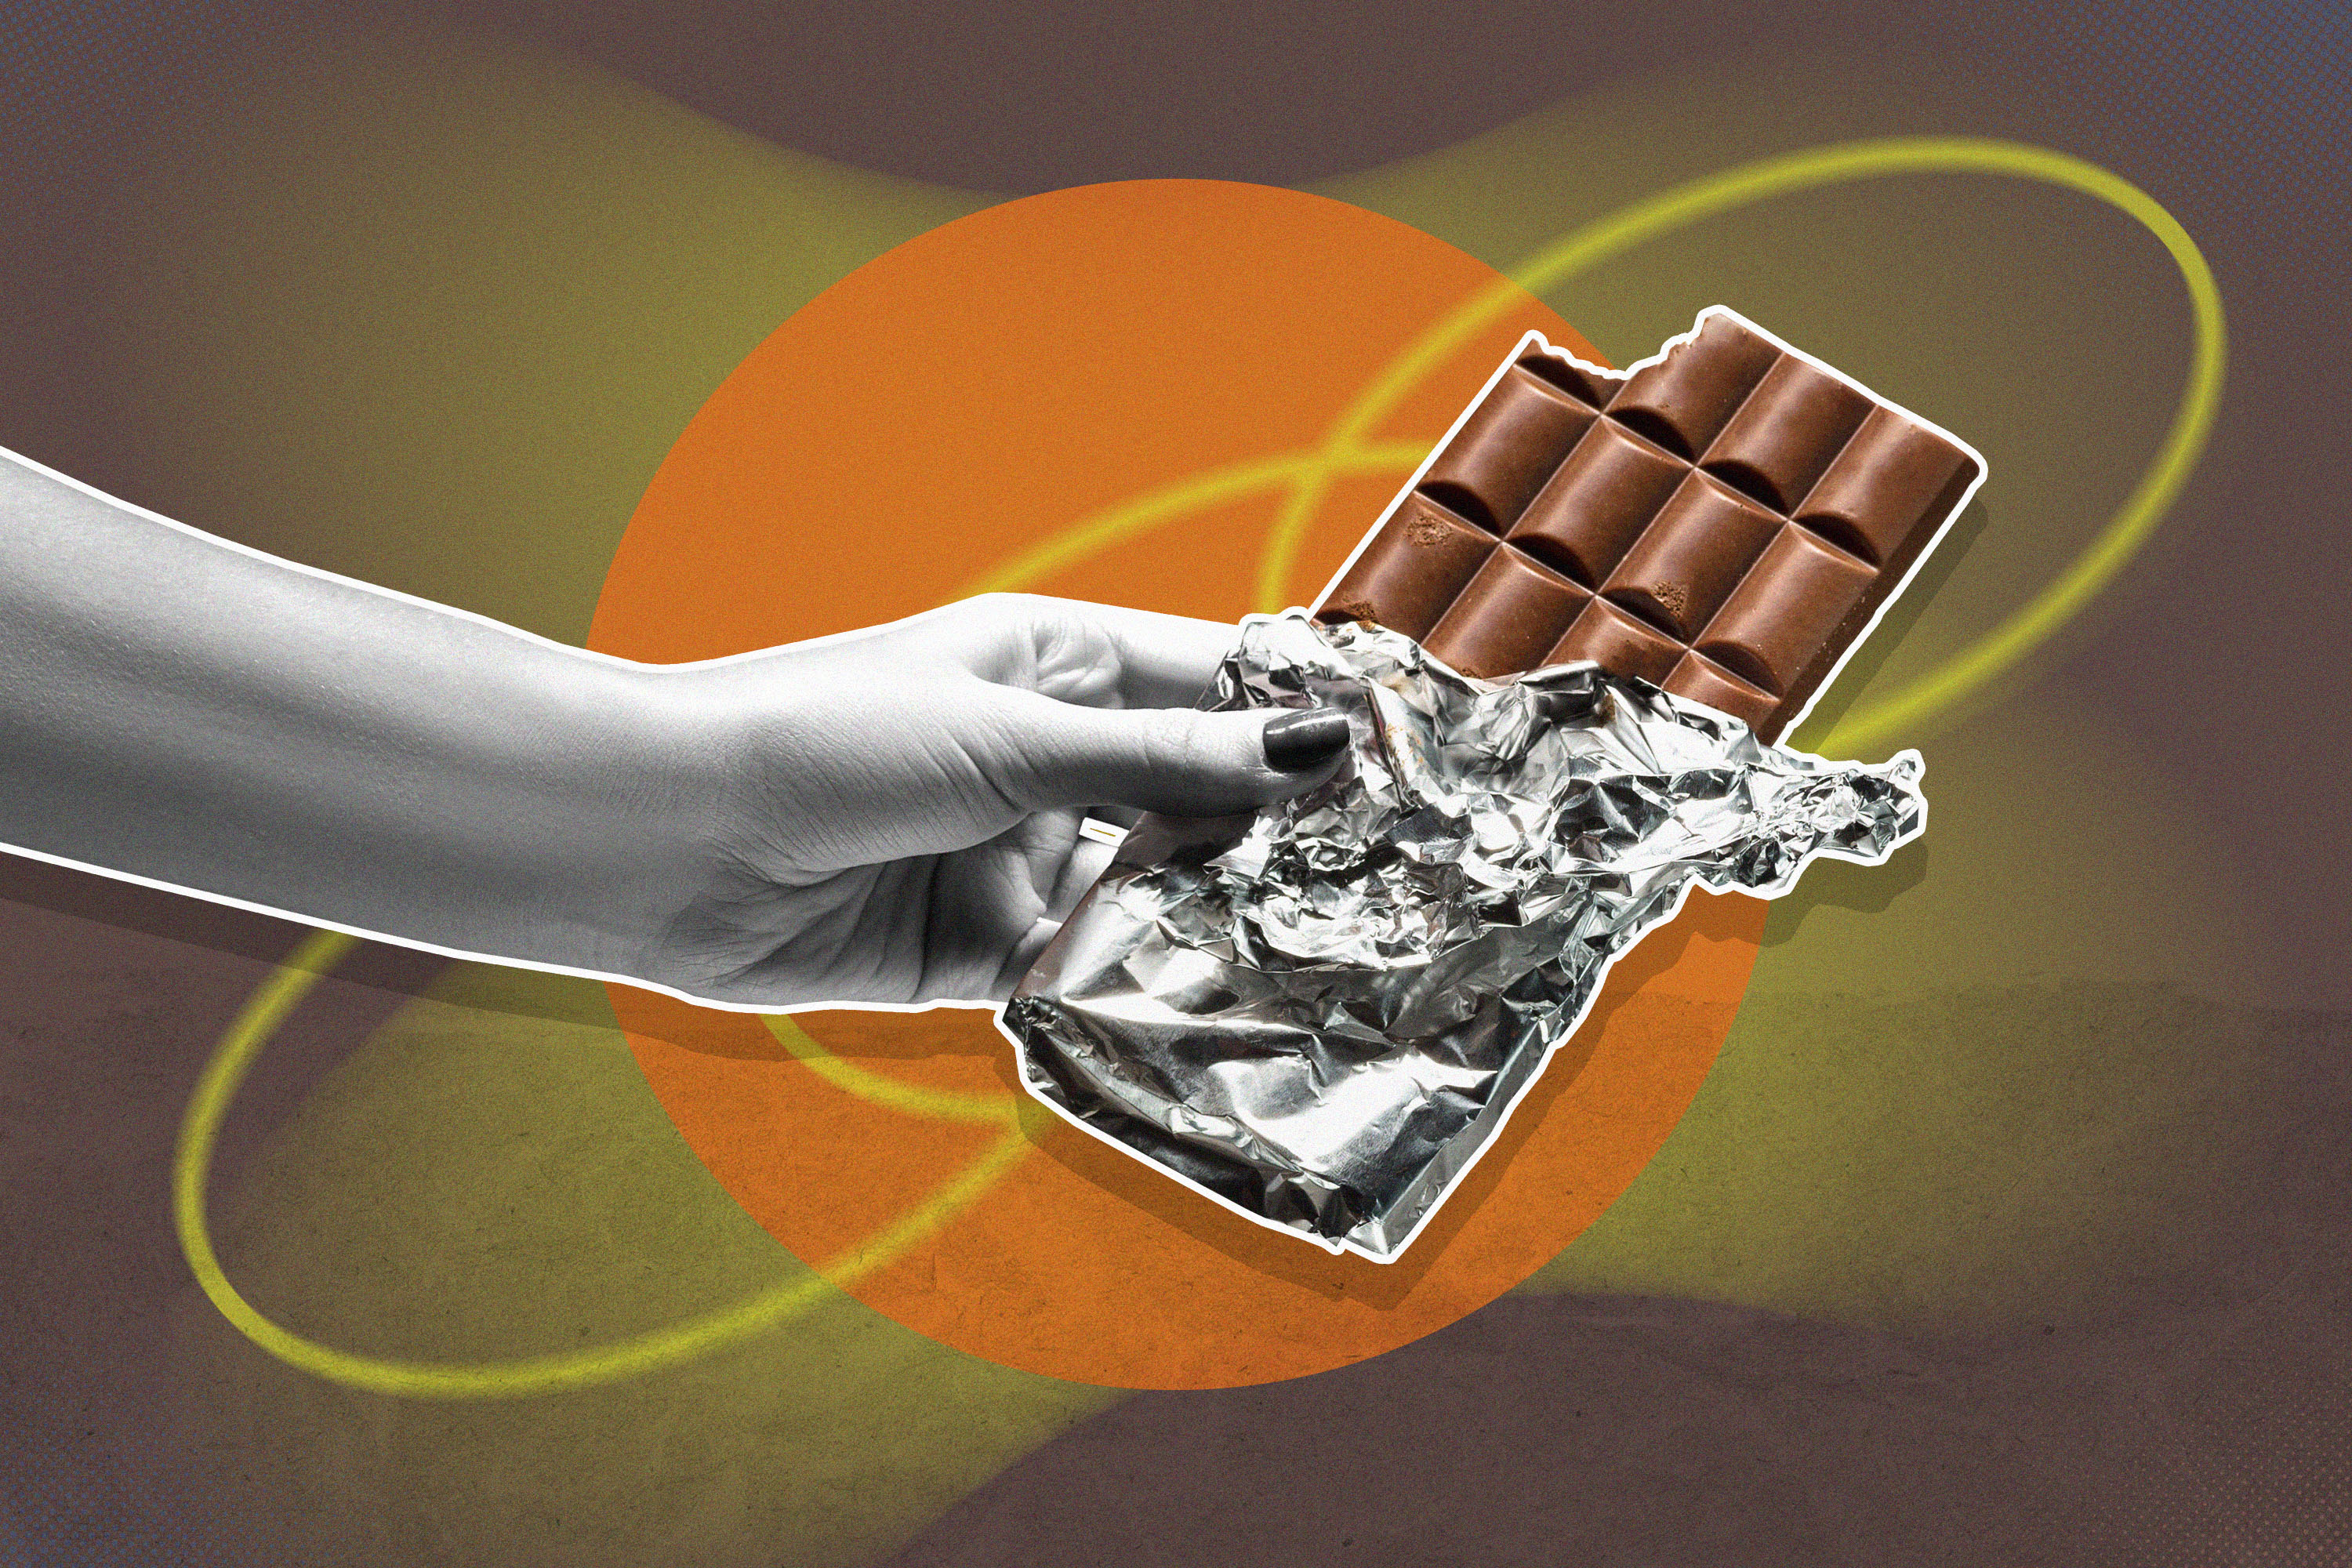 Dark chocolate health benefits? The good and the bad to this sweet treat